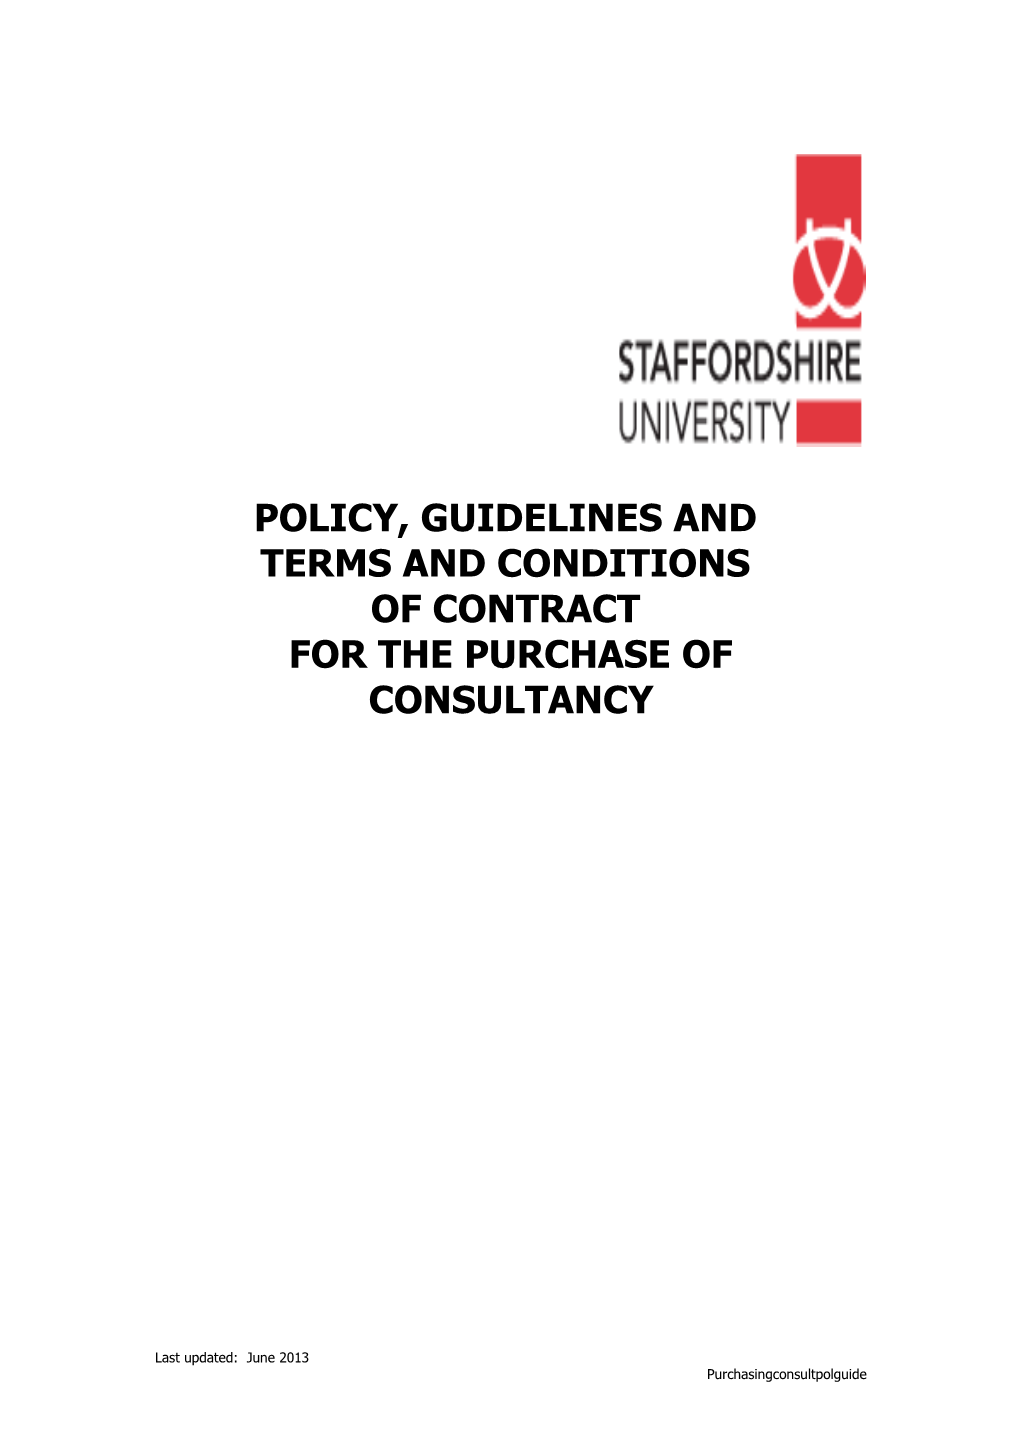 Policy, Guidelines and Standard Contract